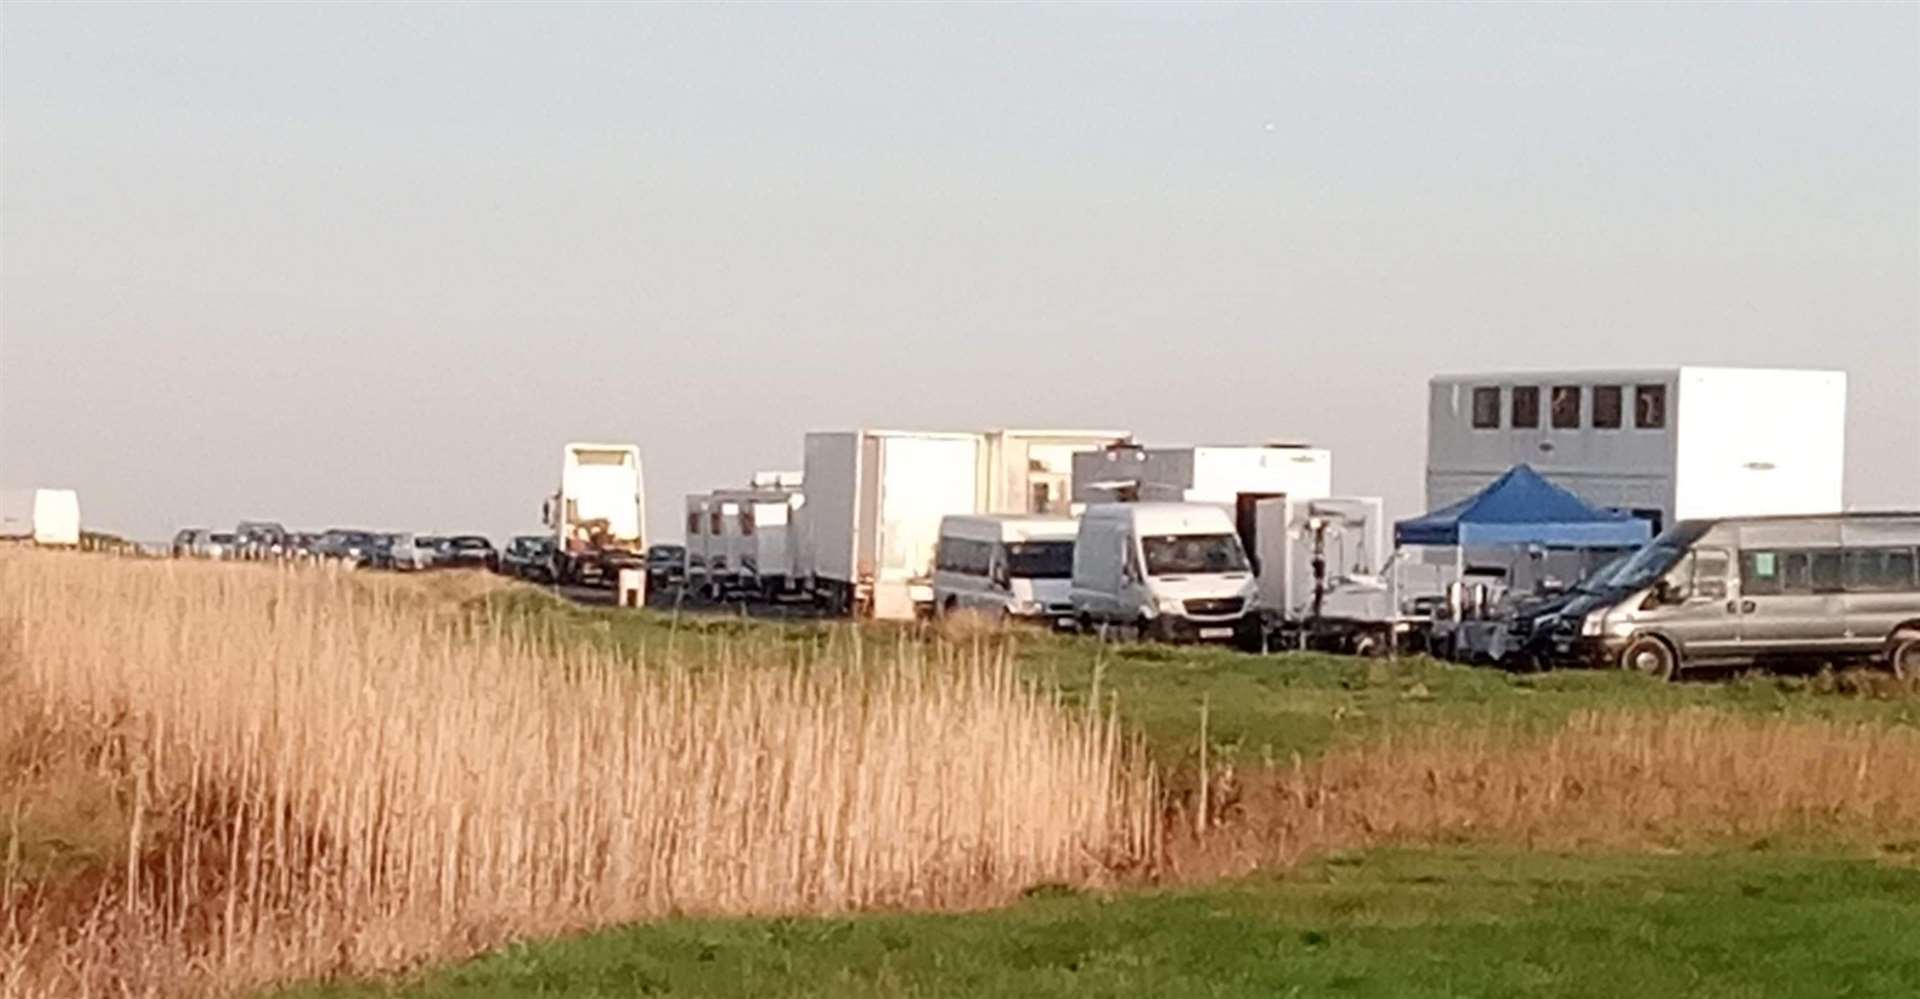 Production crews in Shellness, near Leysdown, on Sheppey filming last December for the Channel 4 real-life drama Deceit about the murder of mum Rachel Nickell in 1992. Picture: Jane Hill